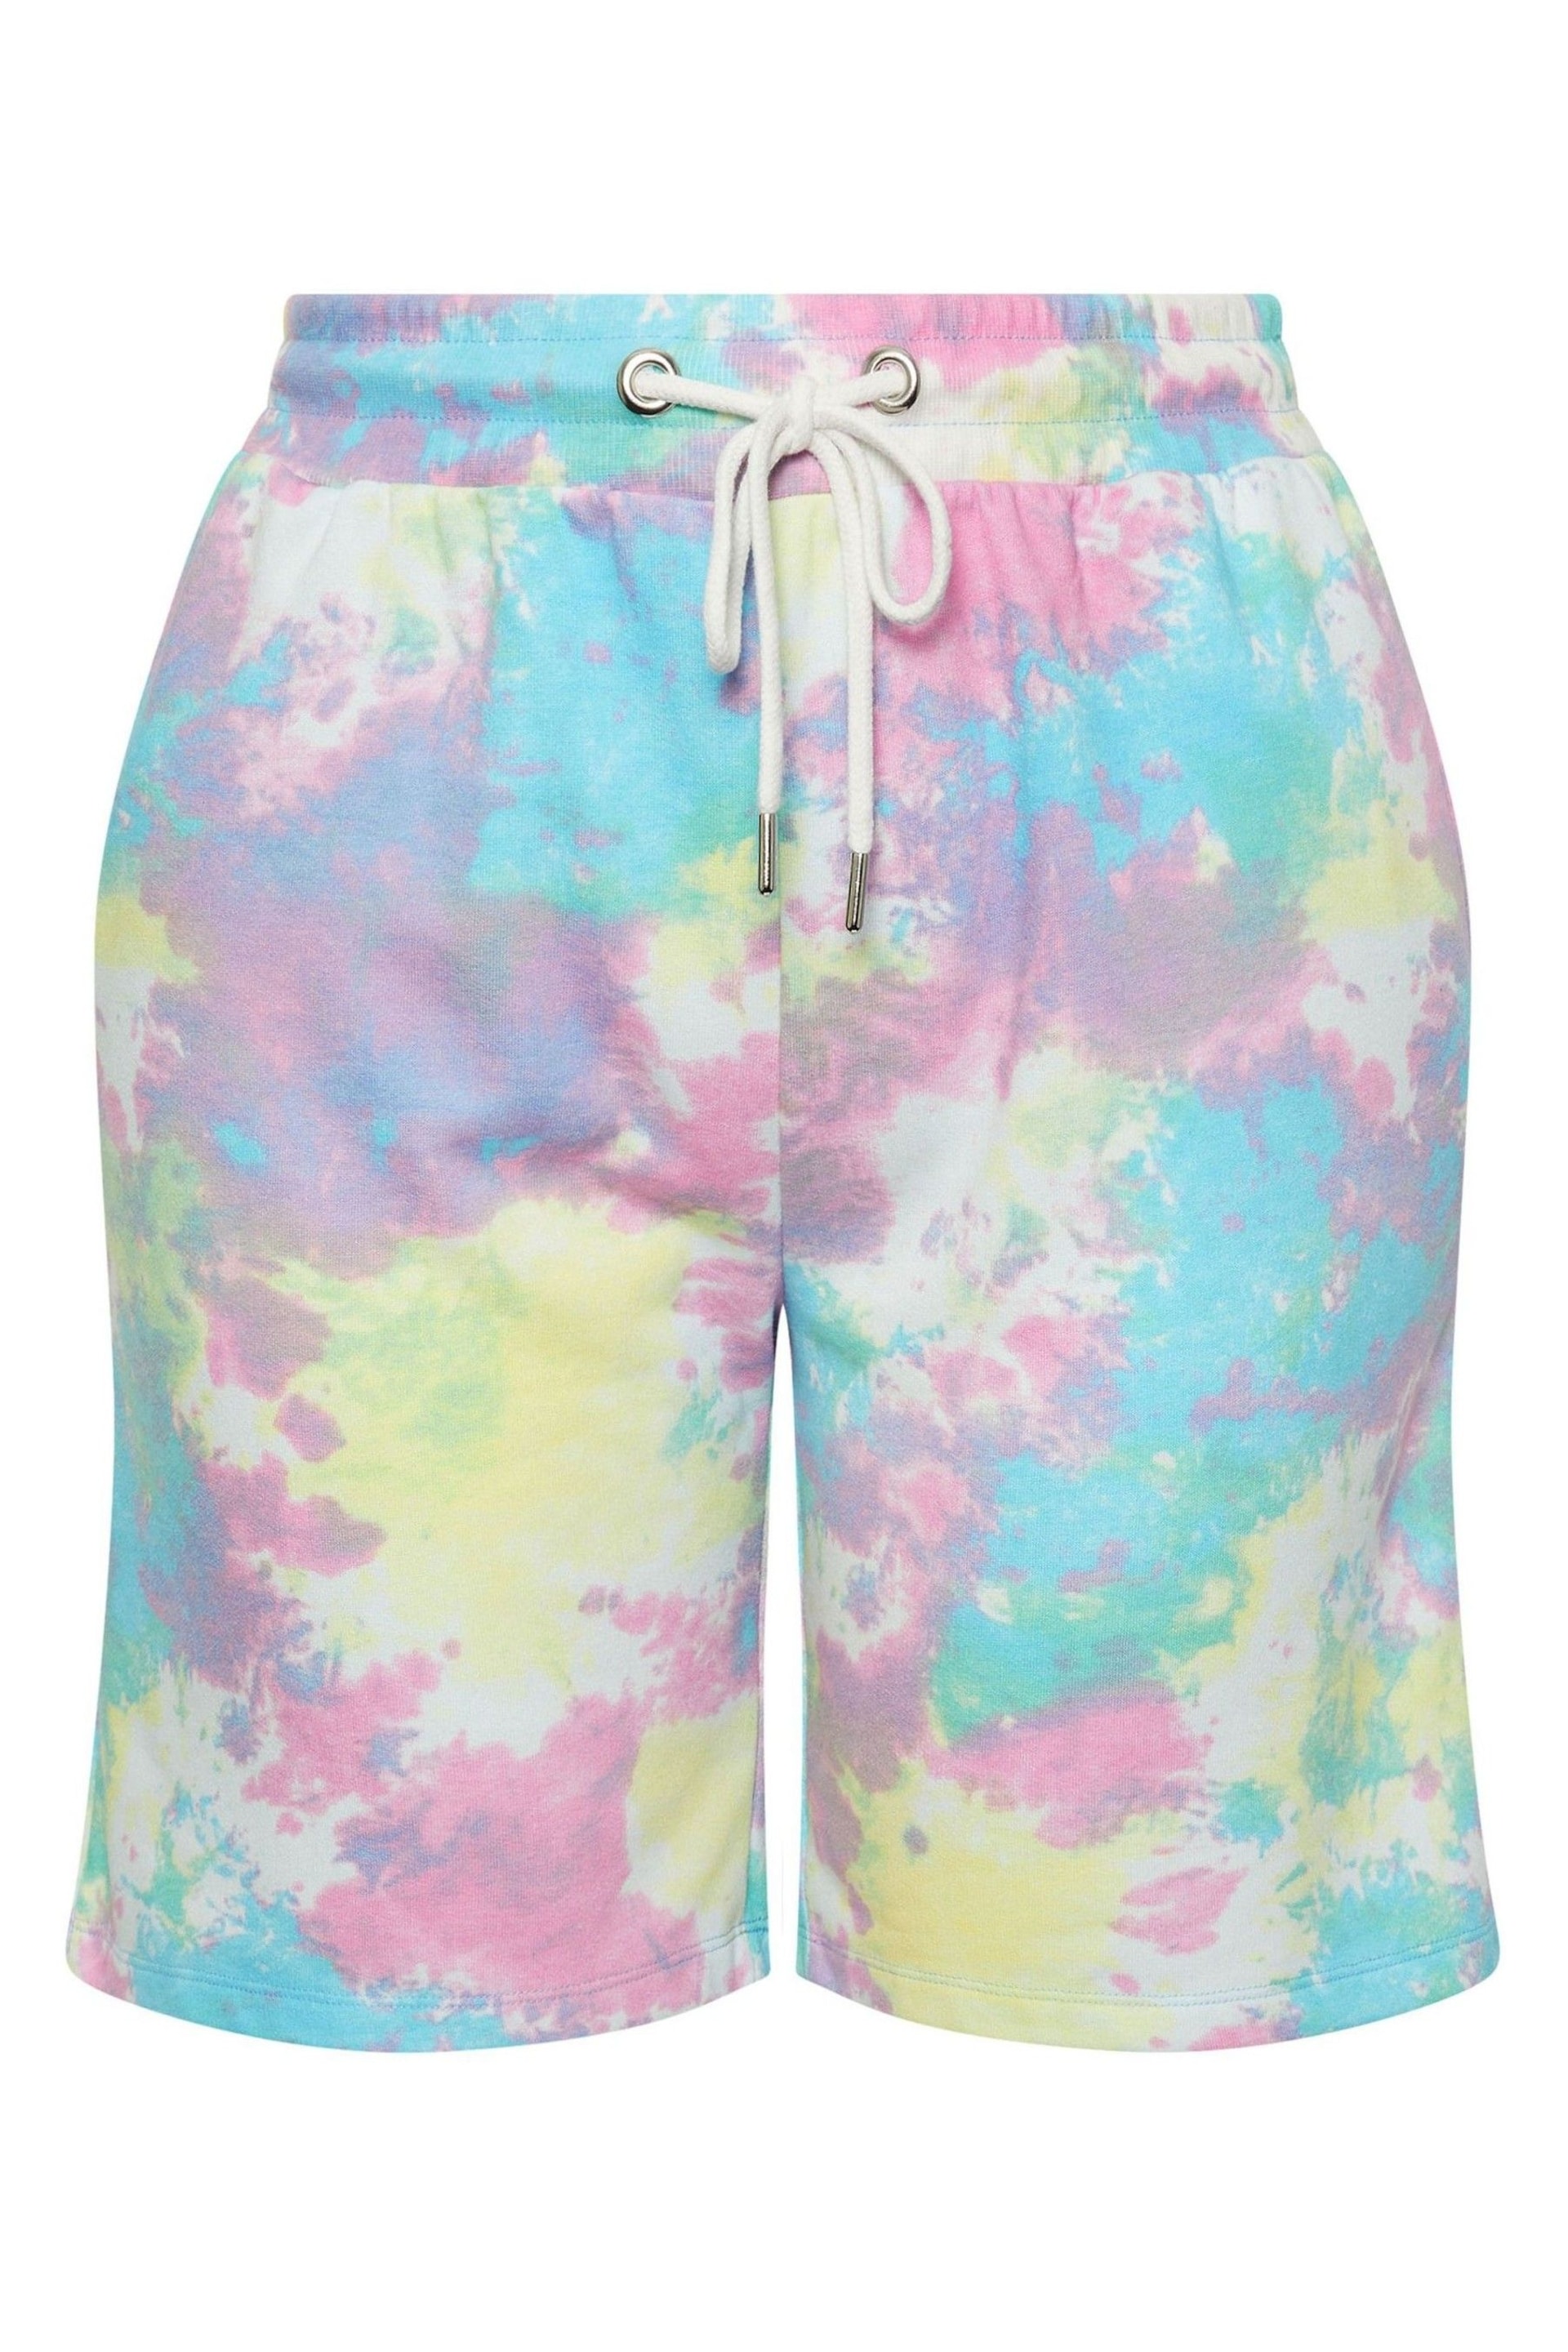 Yours Curve Pink Tie Dye Joggers Shorts - Image 5 of 5